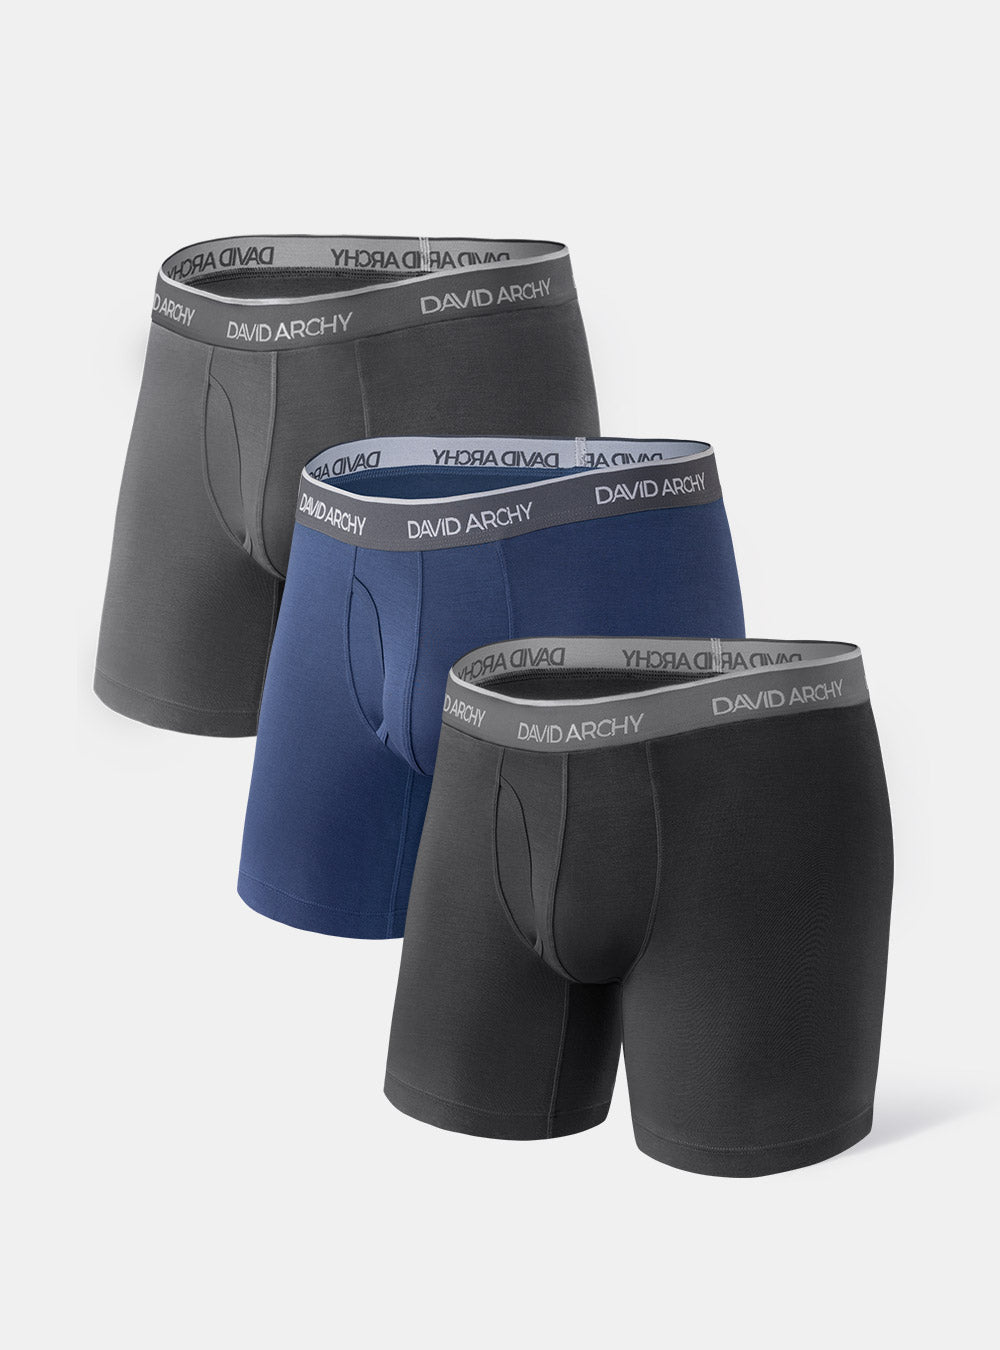 Buy DAVID ARCHY Men's Underwear Micro Modal Dual Pouch Trunks Ball Pouch  Bulge Enhancing Boxer Briefs for Men 3 or 4 Pack, Black/Dark Gray/Navy  Blue/Olive Green- 2.5 in 4 Pack, Small at